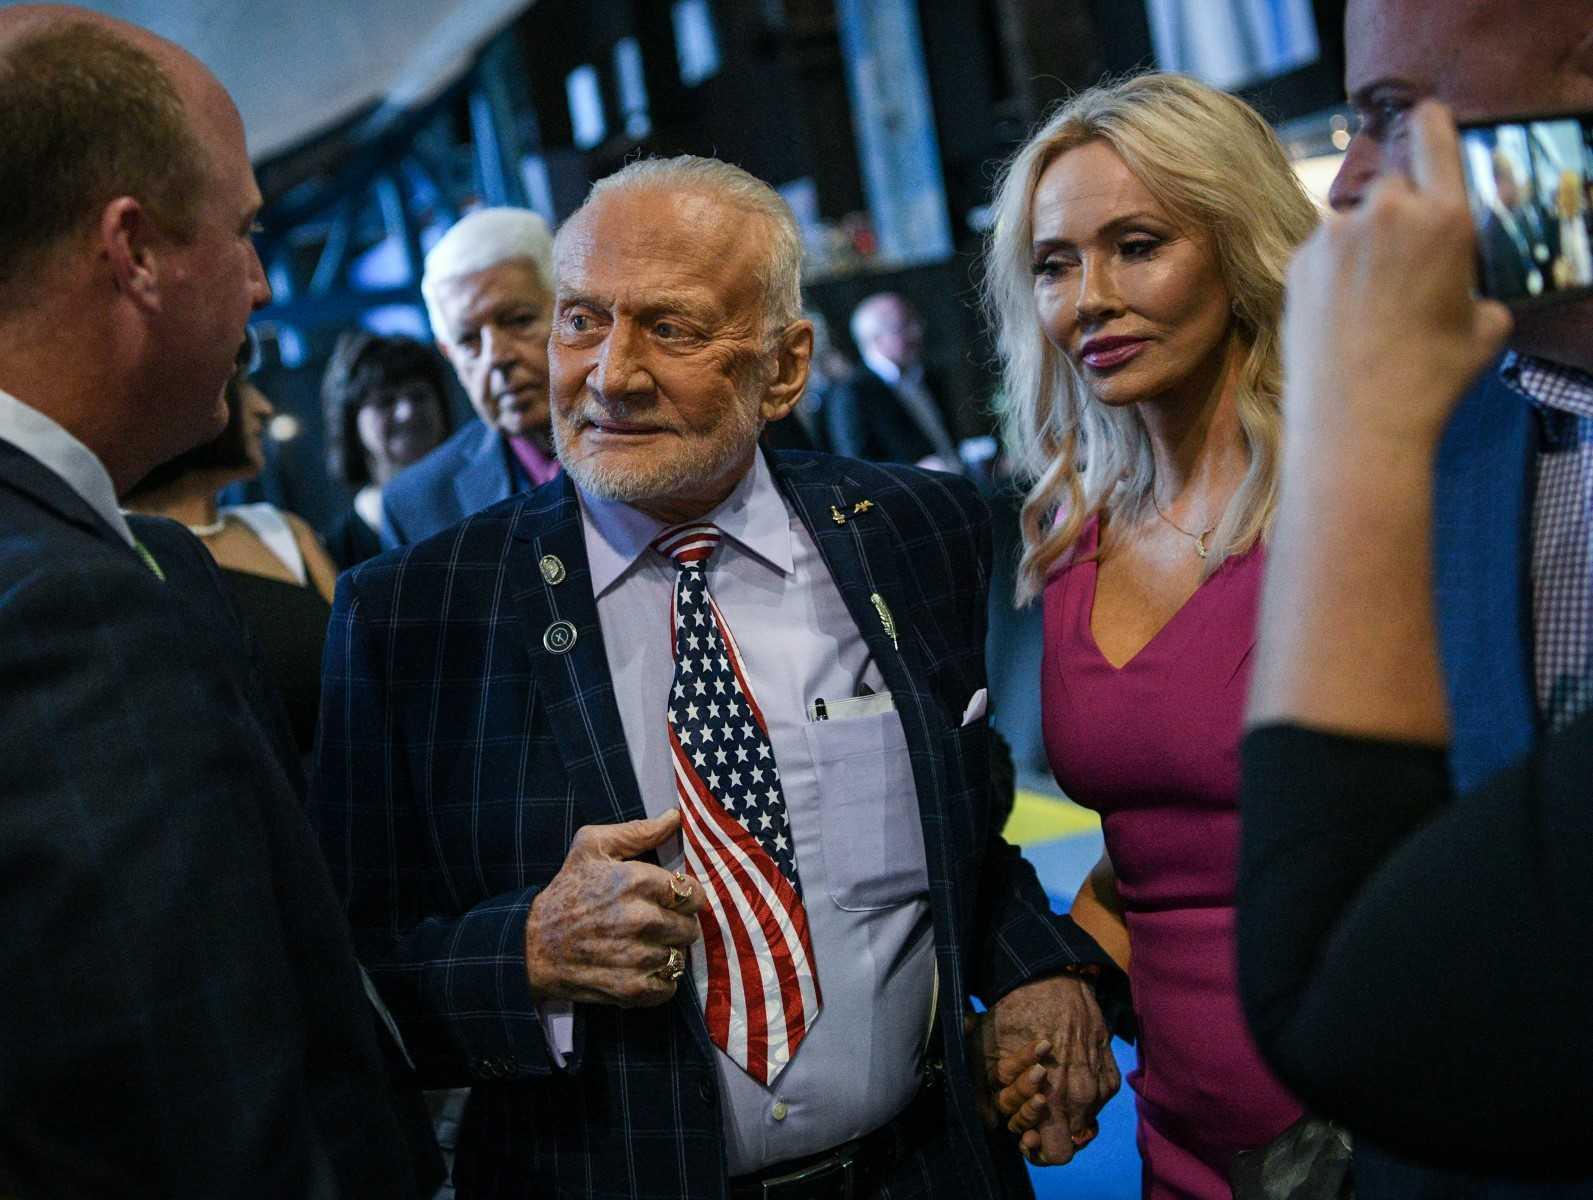 In this file photo taken on July 17, 2019, former Nasa astronaut Buzz Aldrin arrives with Anca Faur for an Apollo 11 anniversary celebration dinner at the Davidson Center for Space Exploration at the US Space & Rocket Center in Huntsville, Alabama. Photo: AFP